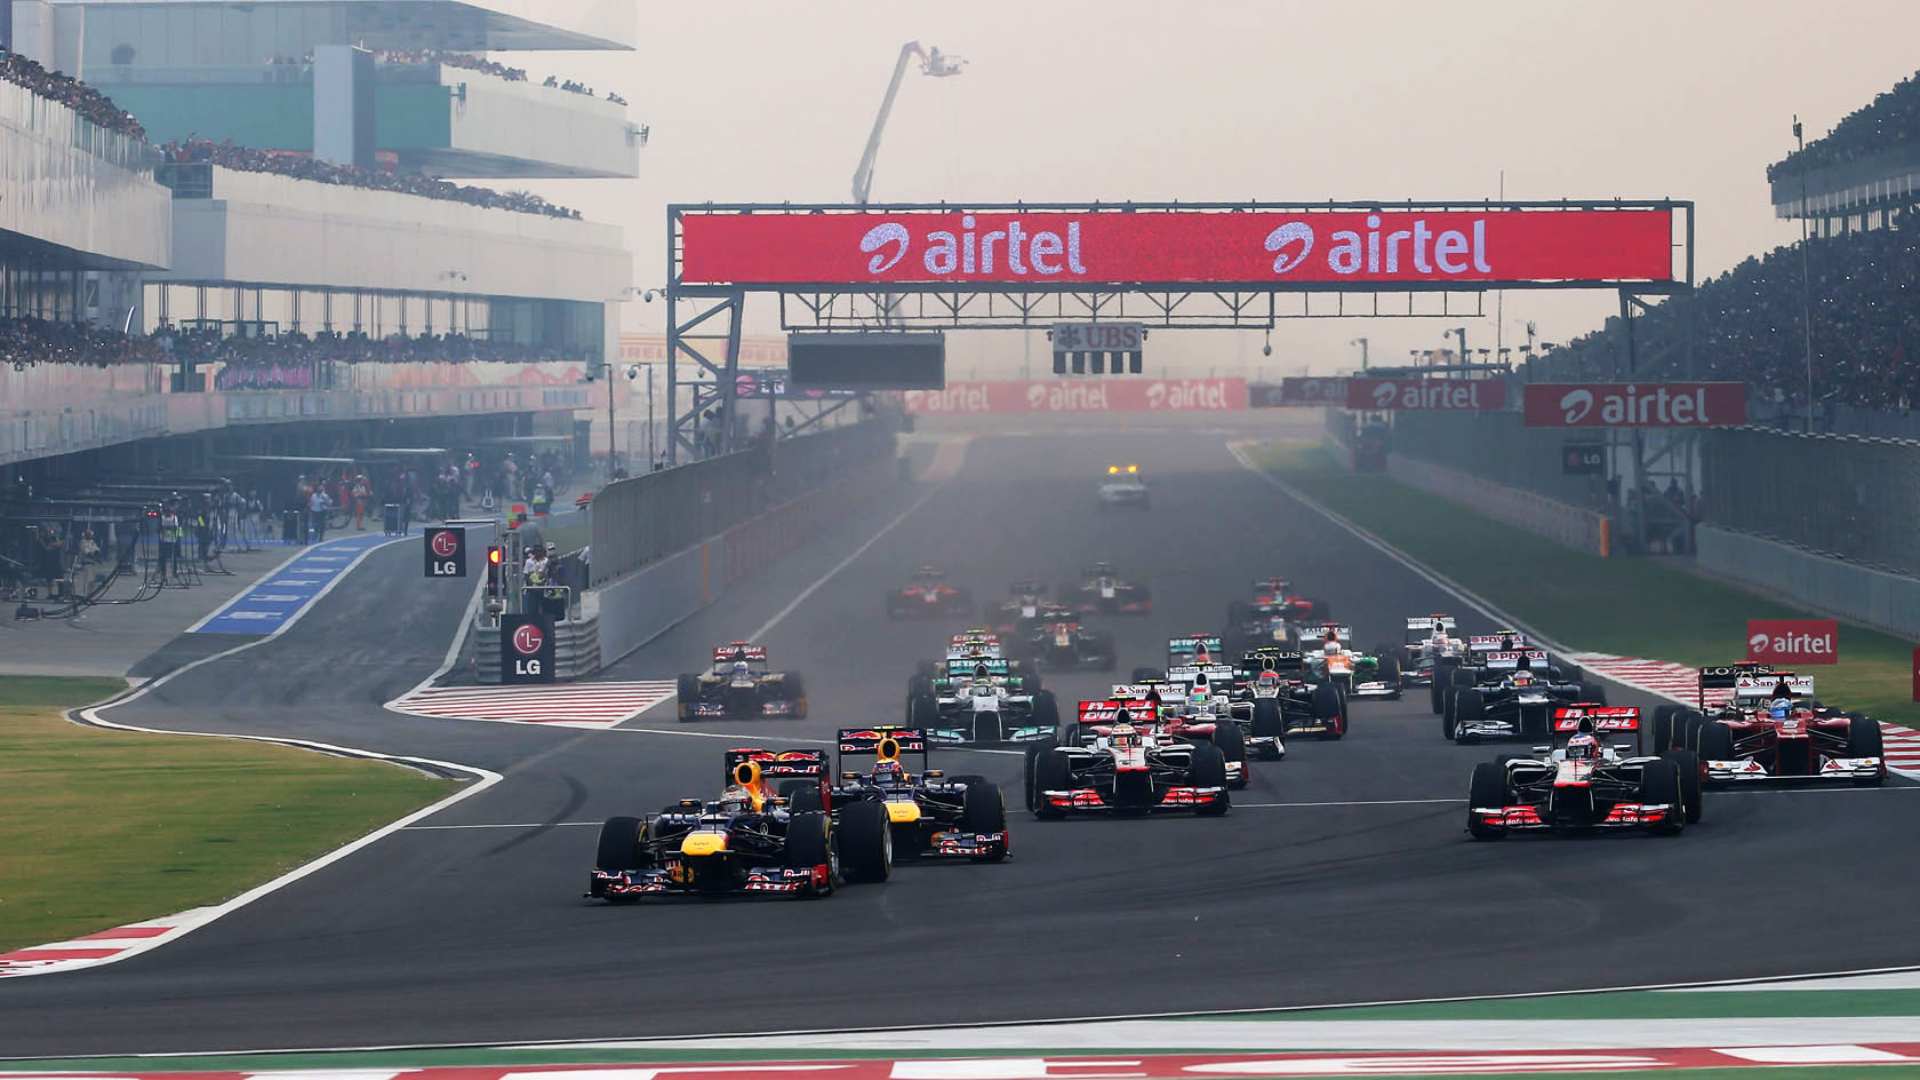 The Buddh International Circuit in India has not hosted an F1 race for a long time.